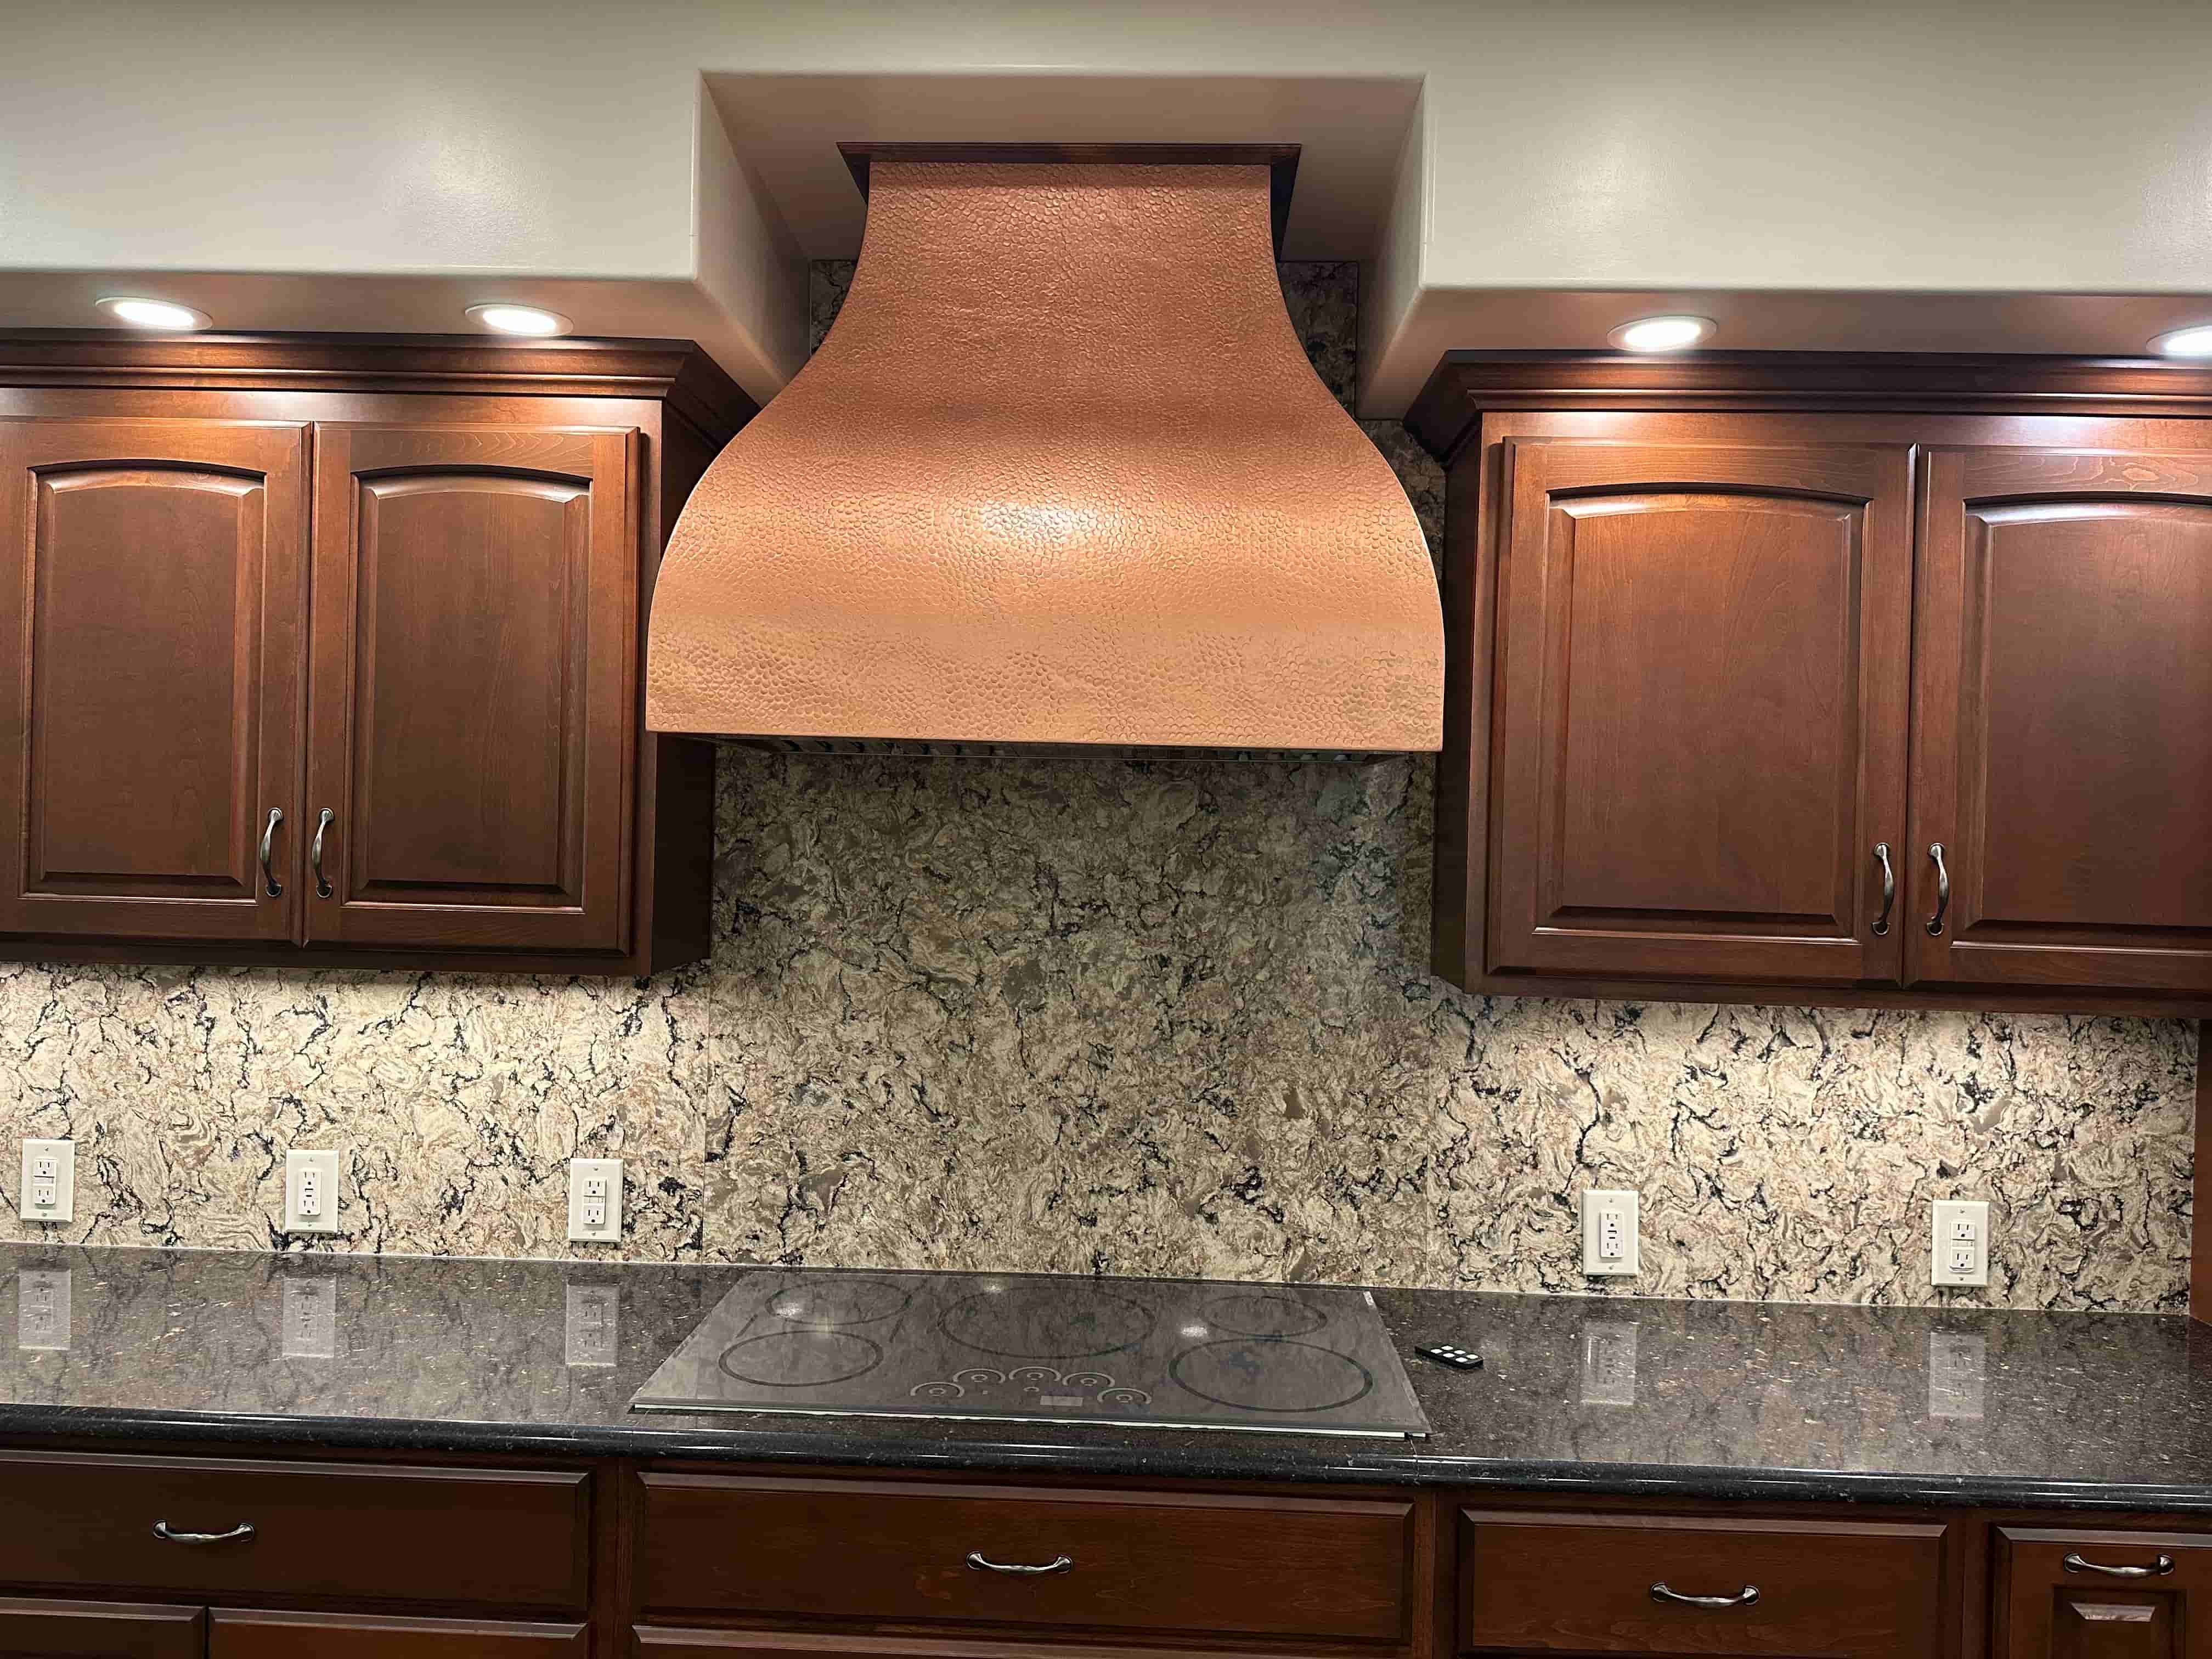 CopperSmith Artisan AT1 Old Coin Copper Kitchen Range Hood in a craftsman style features wood cabinets black countertops marble backsplash